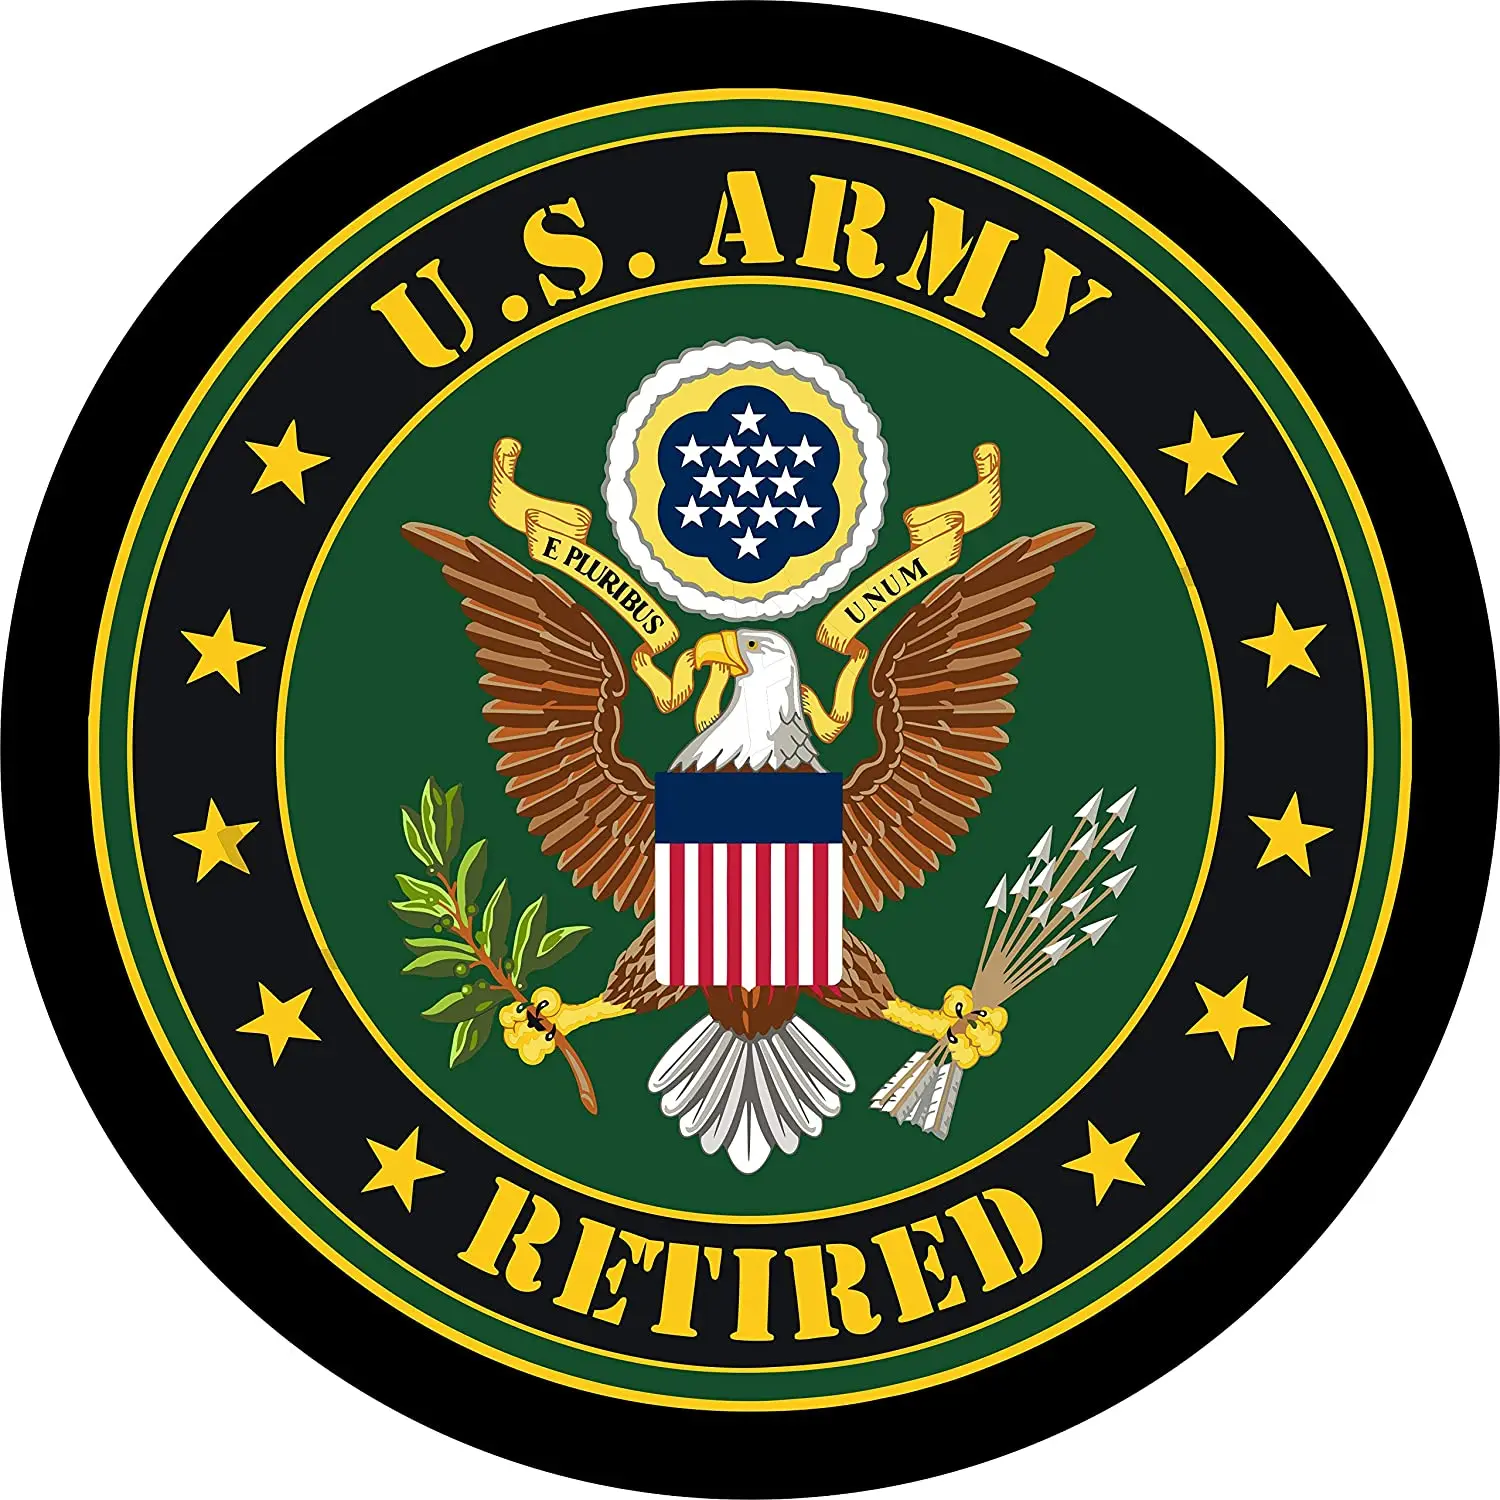 

TIRE COVER CENTRAL US Army Seal Retired Spare Tire Cover ( Custom Sized to Any Make/Model 255/70R18